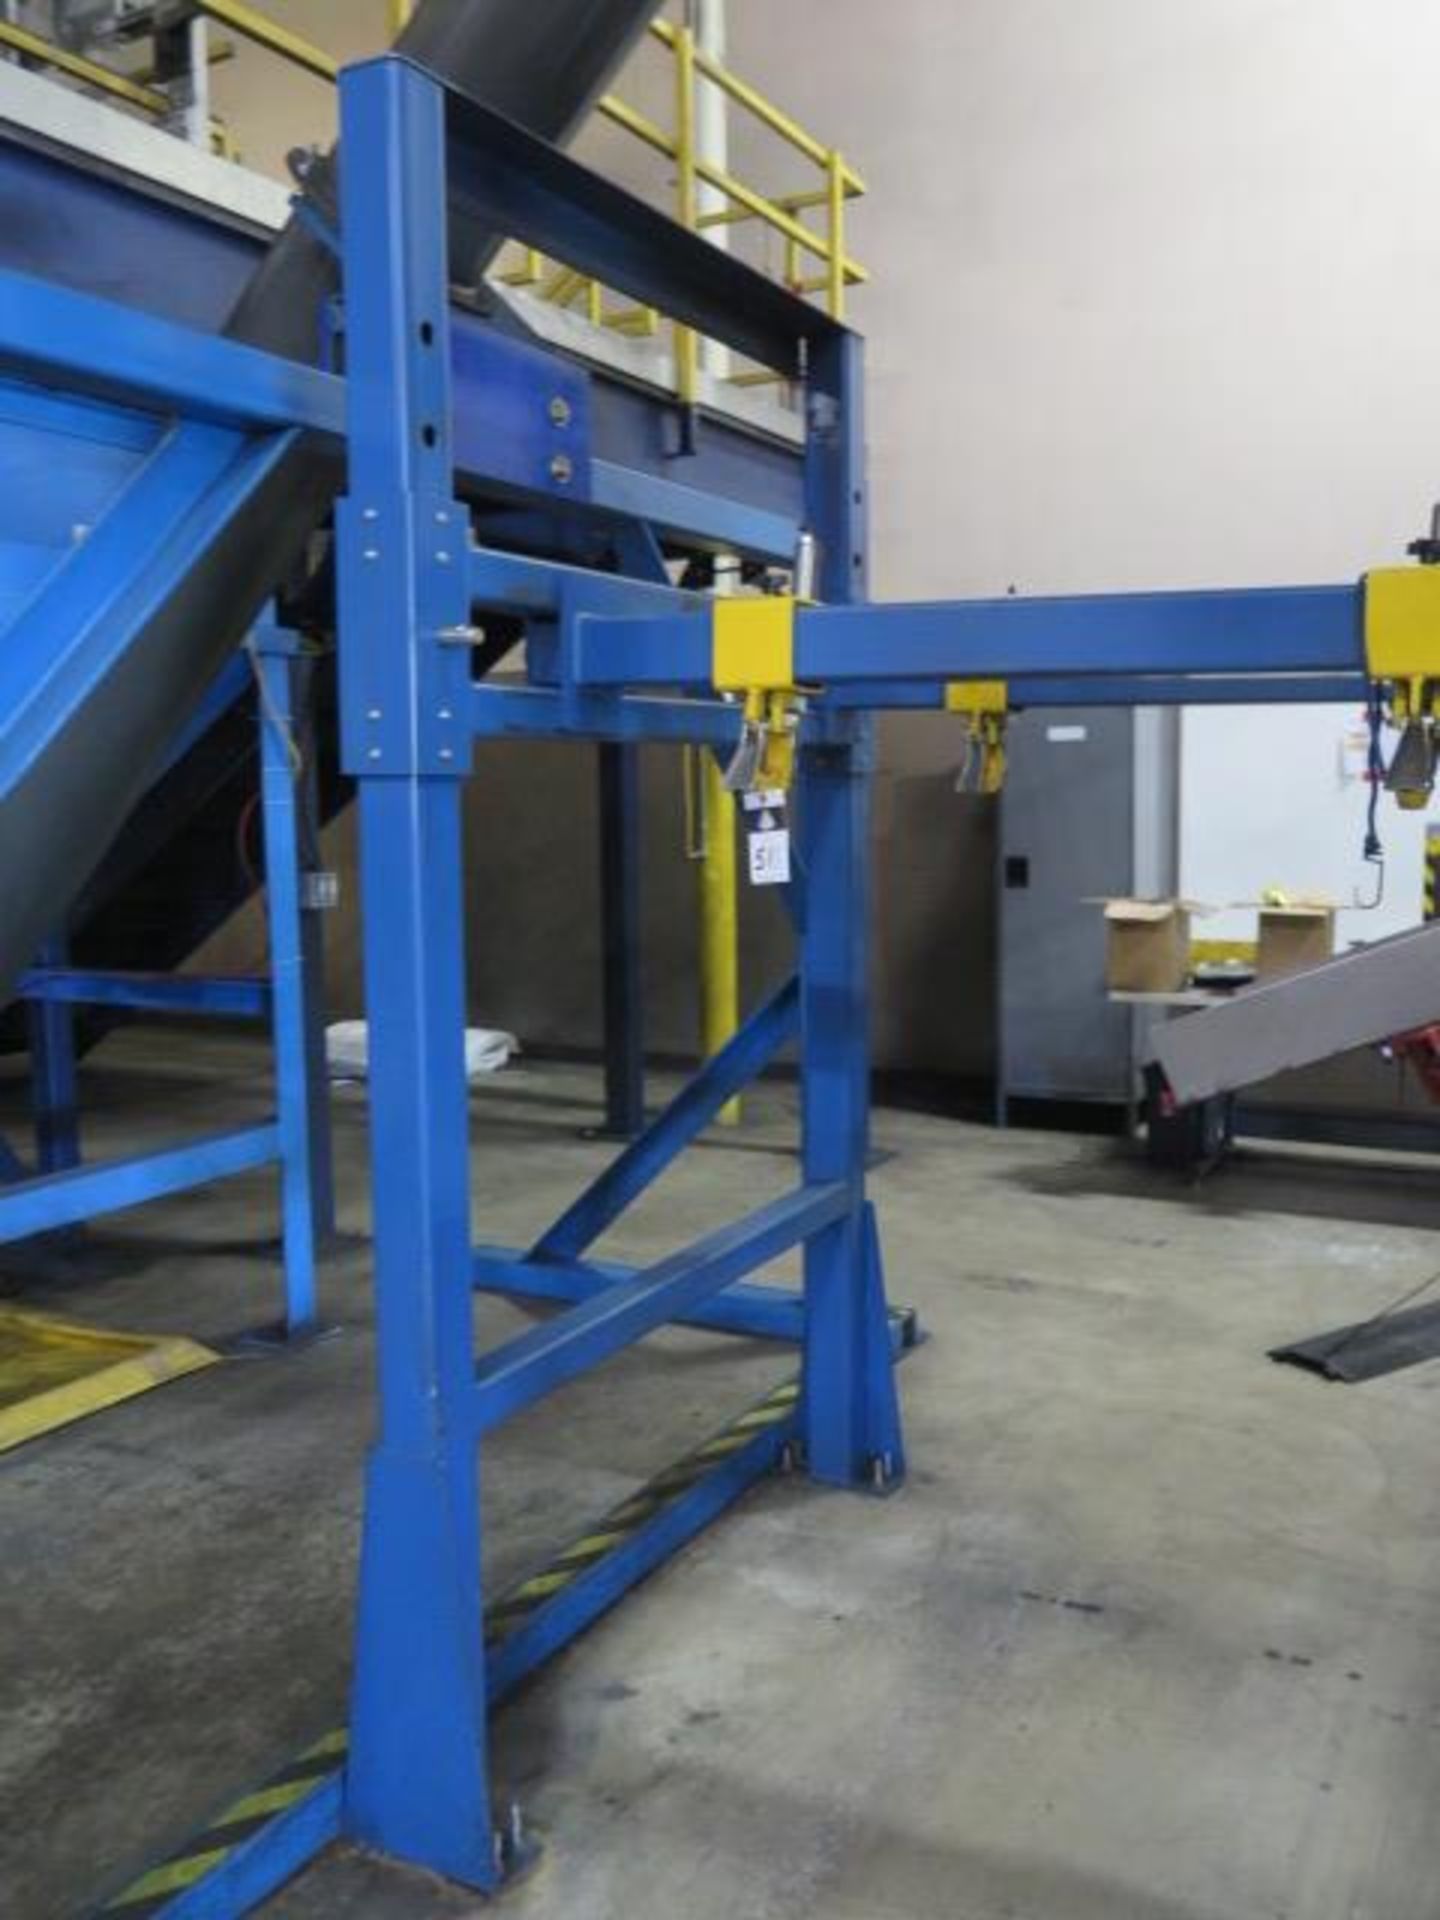 Bag Loading Station, SOLD AS IS AND WHERE IS WITH NO WARRANTY - Image 3 of 3